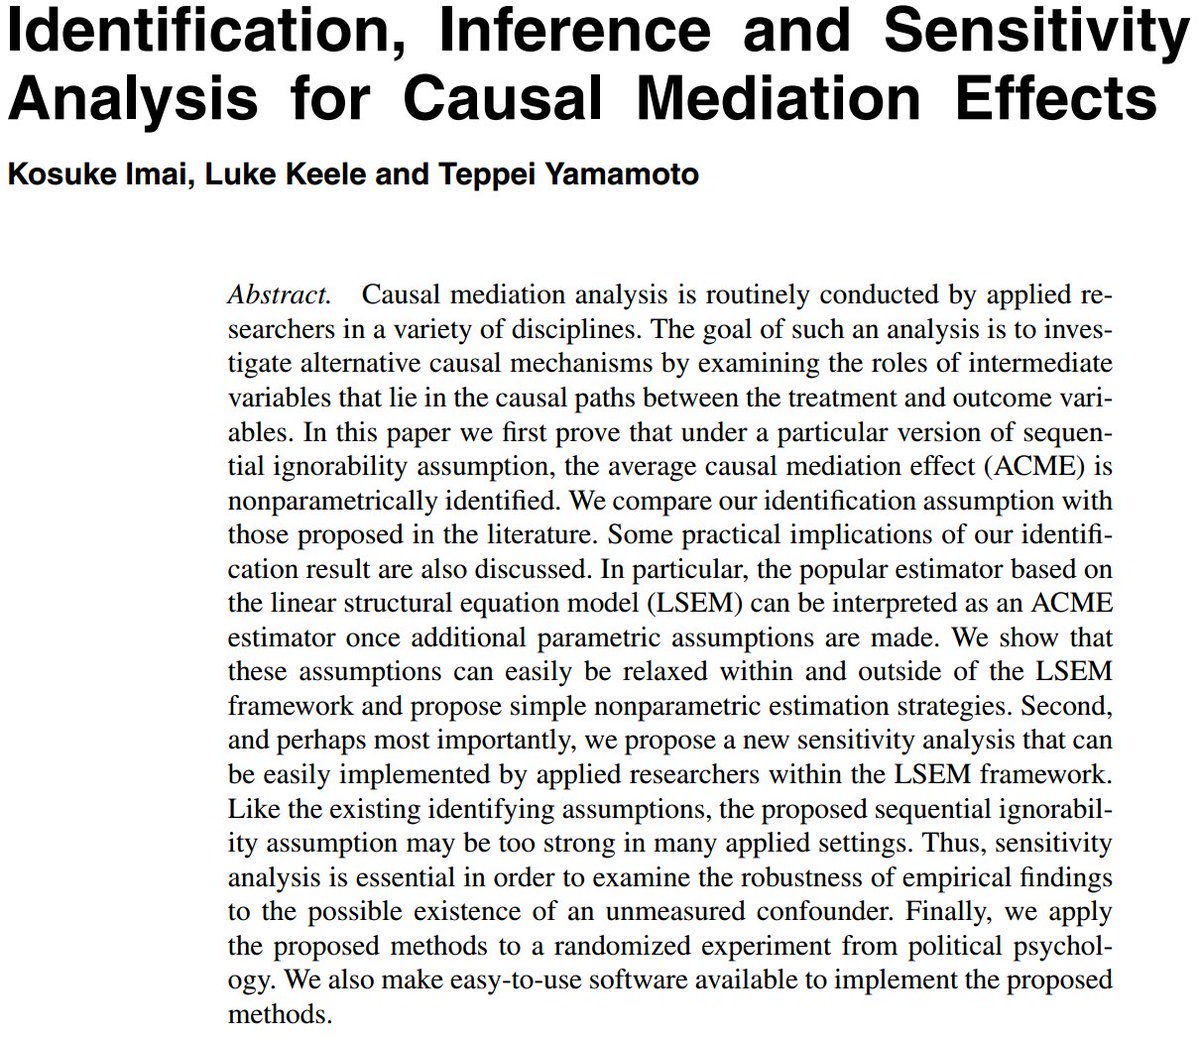 Econometrics TreadIdentification, Inference and Sensitivity Analysis for Causal Mediation Effects by Imai, Keele and Yamamoto (IKY, 2010,  https://bit.ly/3emZ4Ag )Mediation analysis decomposes a treatment effect in different causal mechanisms.